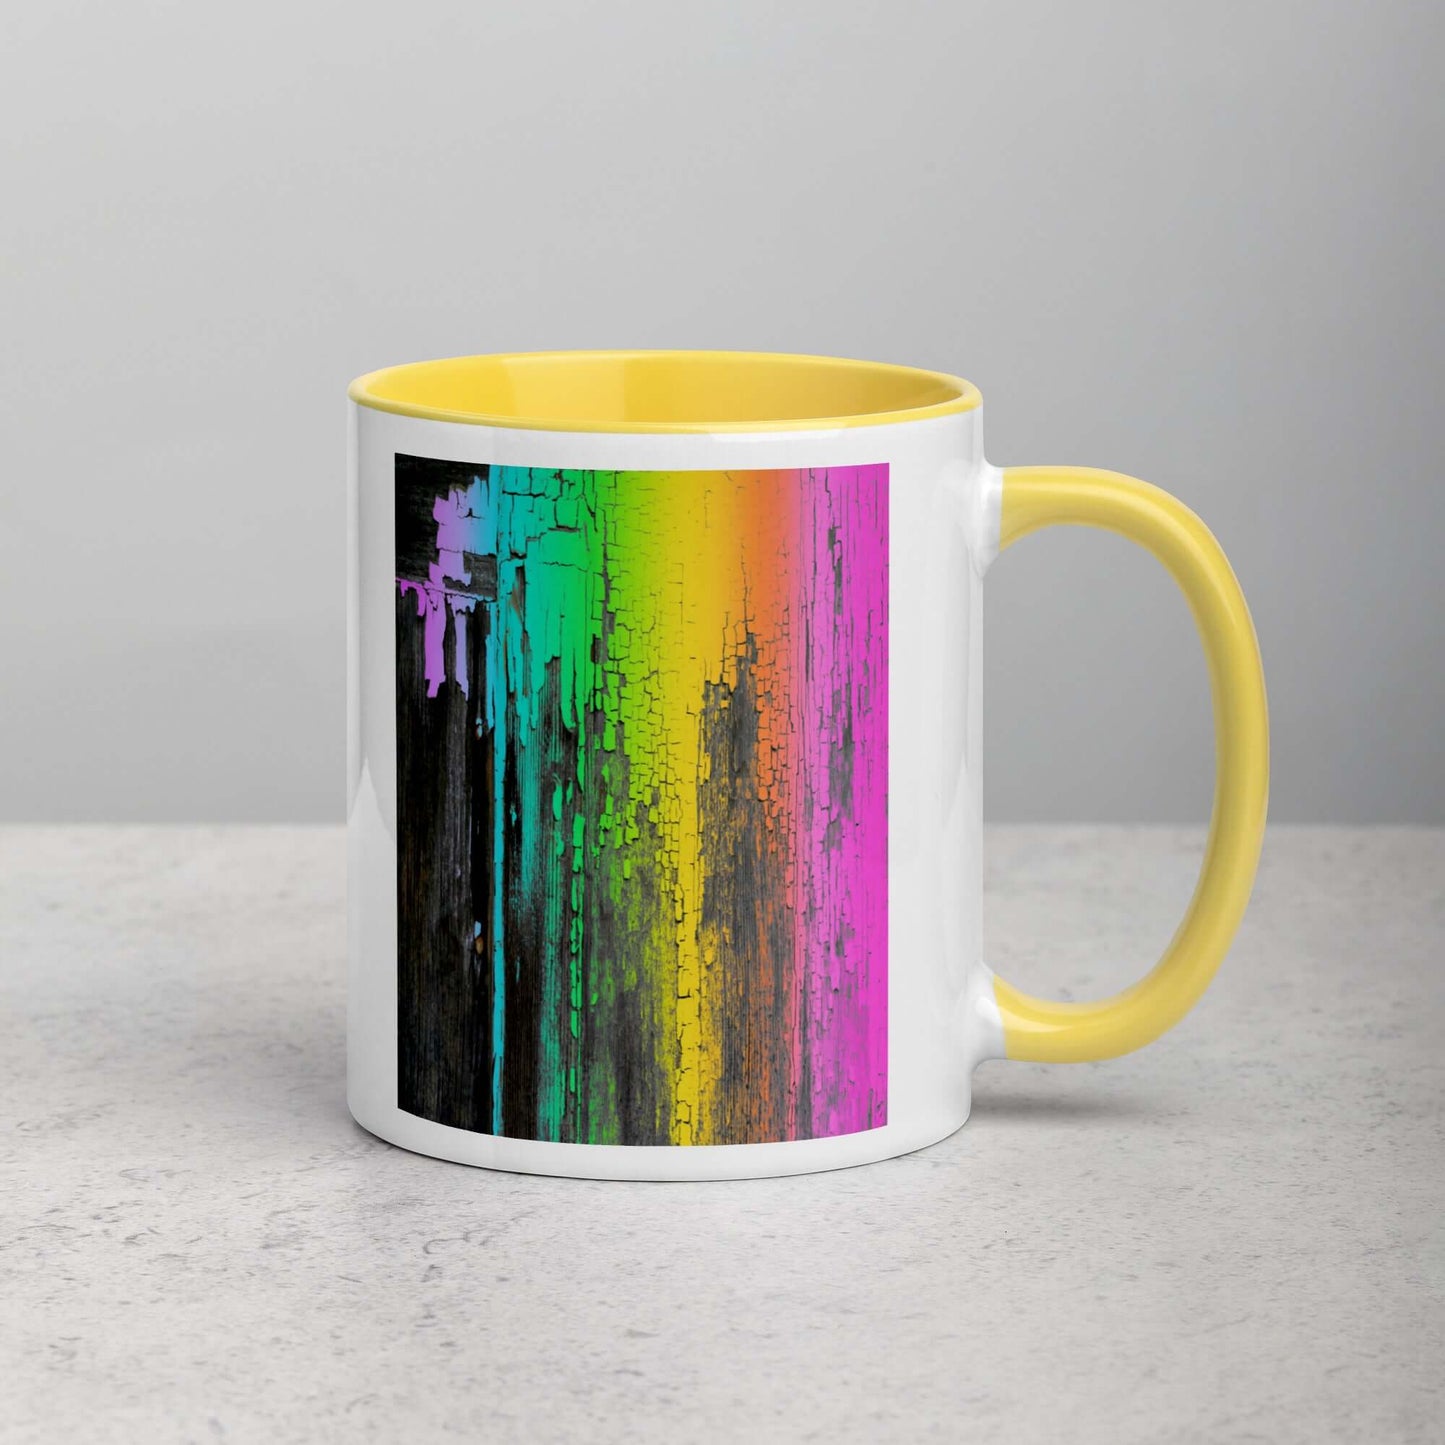 Rainbow Paint Drips on Old Wood “Rainbow Crackle” Mug with Bright Yellow Color Inside Right Handed Front View